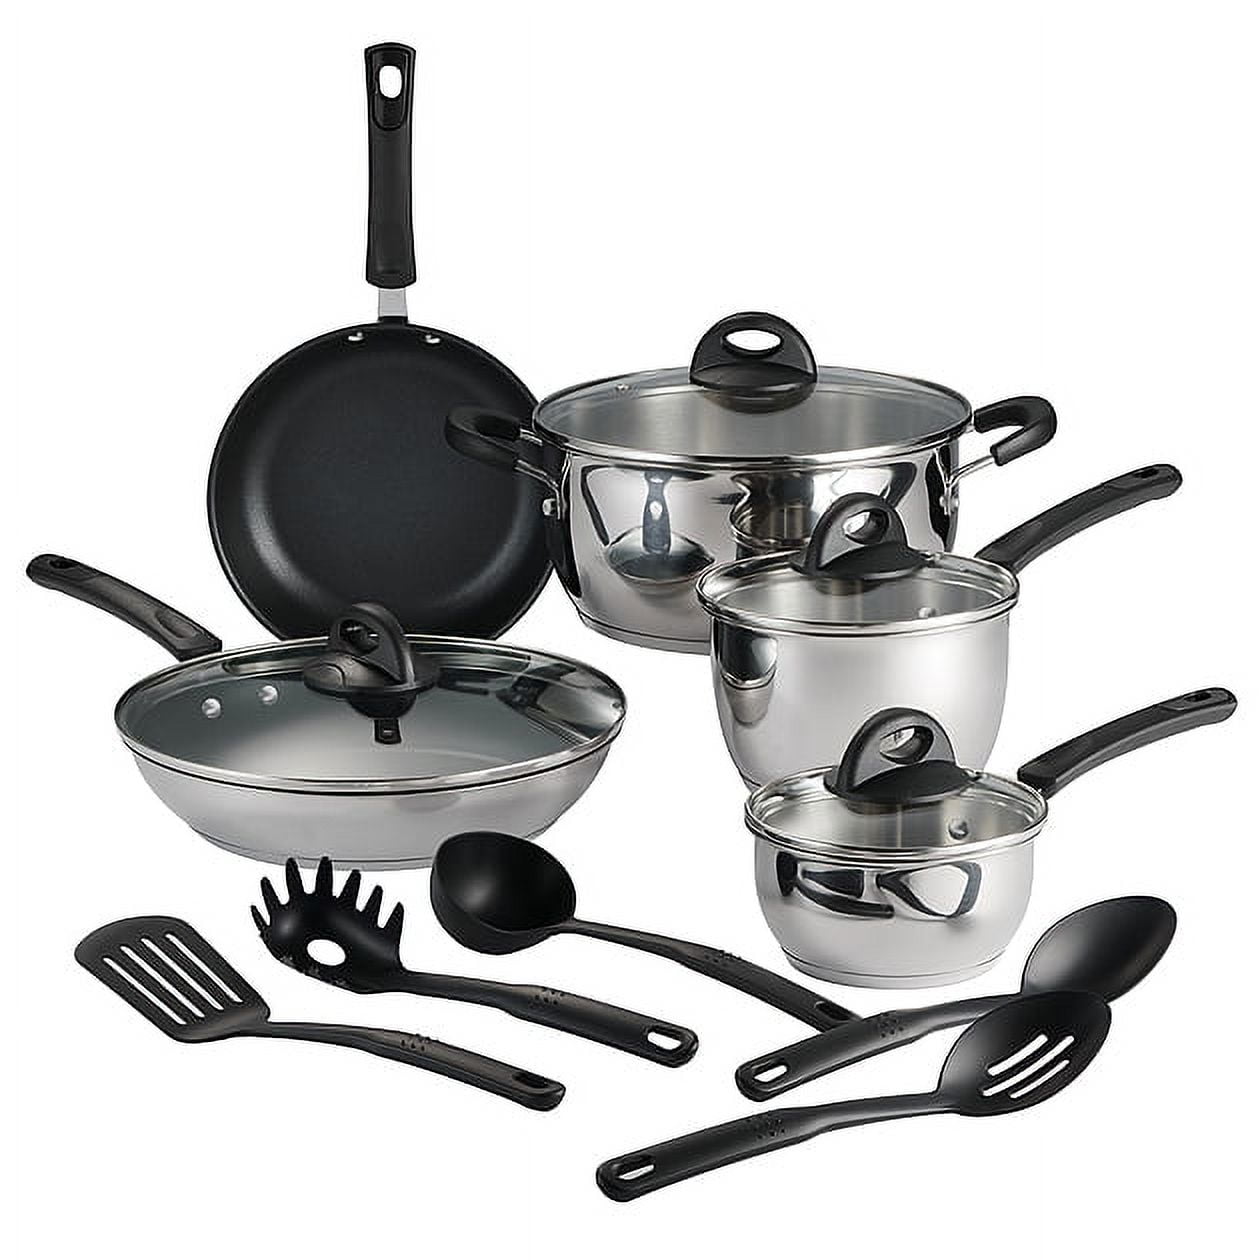  Tramontina Cookware Set Tri-Ply Clad Stainless Steel 14-Piece  80116/045DS: Home & Kitchen